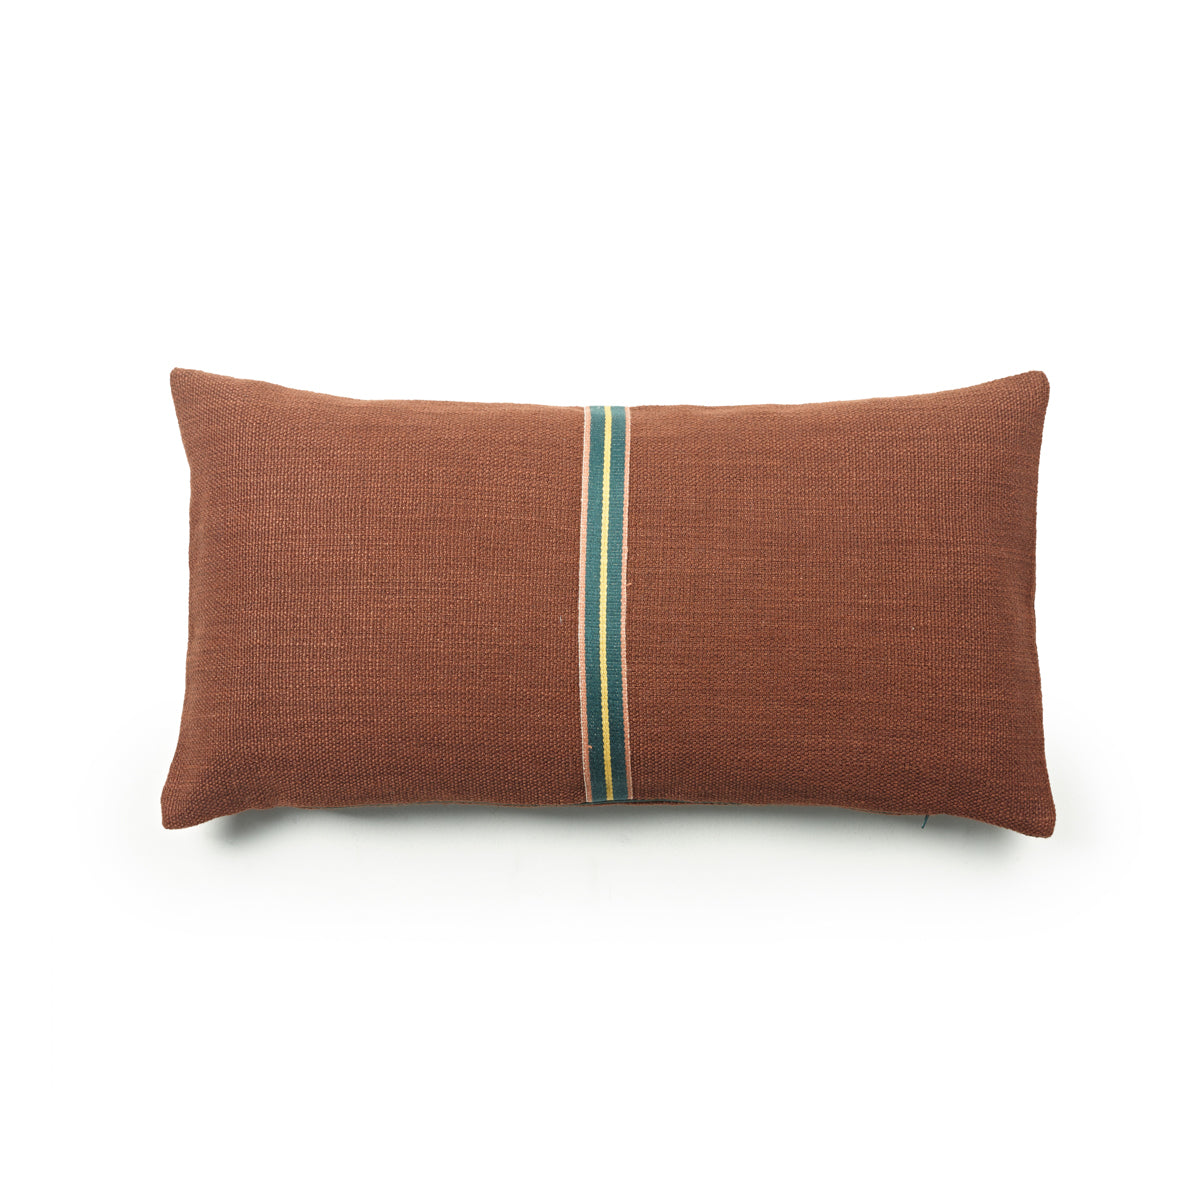 oblong linen and wool pillow cover in burnet sienna with green trim stripe down center